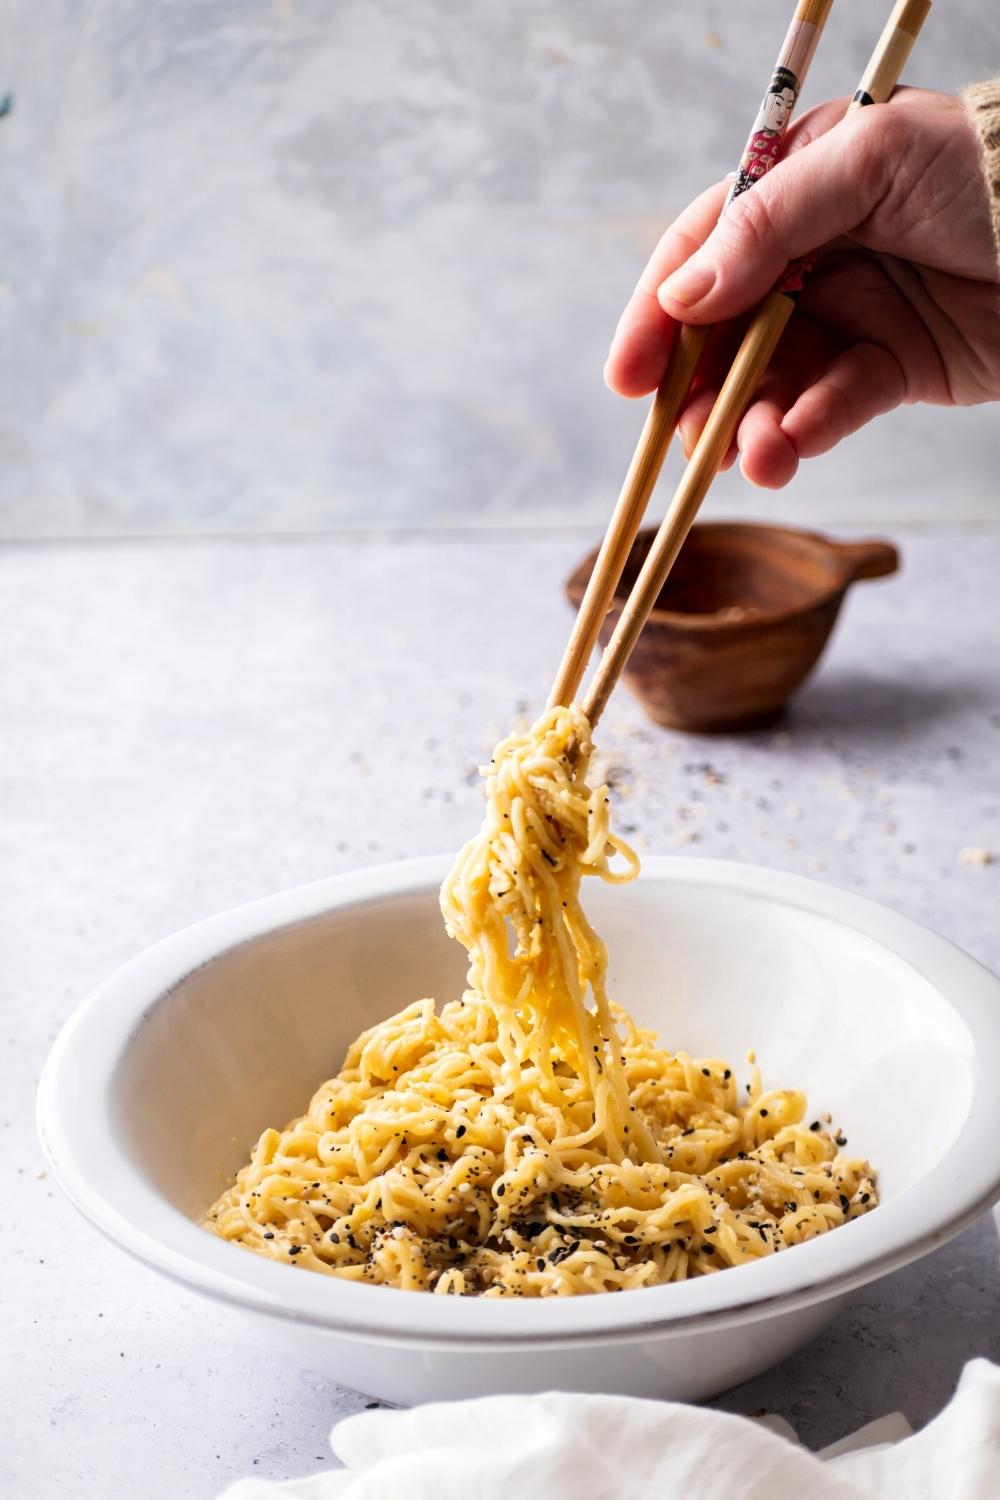 A hand holding a pair of chopsticks with Ramen noodles pinched between the two. The noodles are being held over on white bowl filled with Ramen noodles.